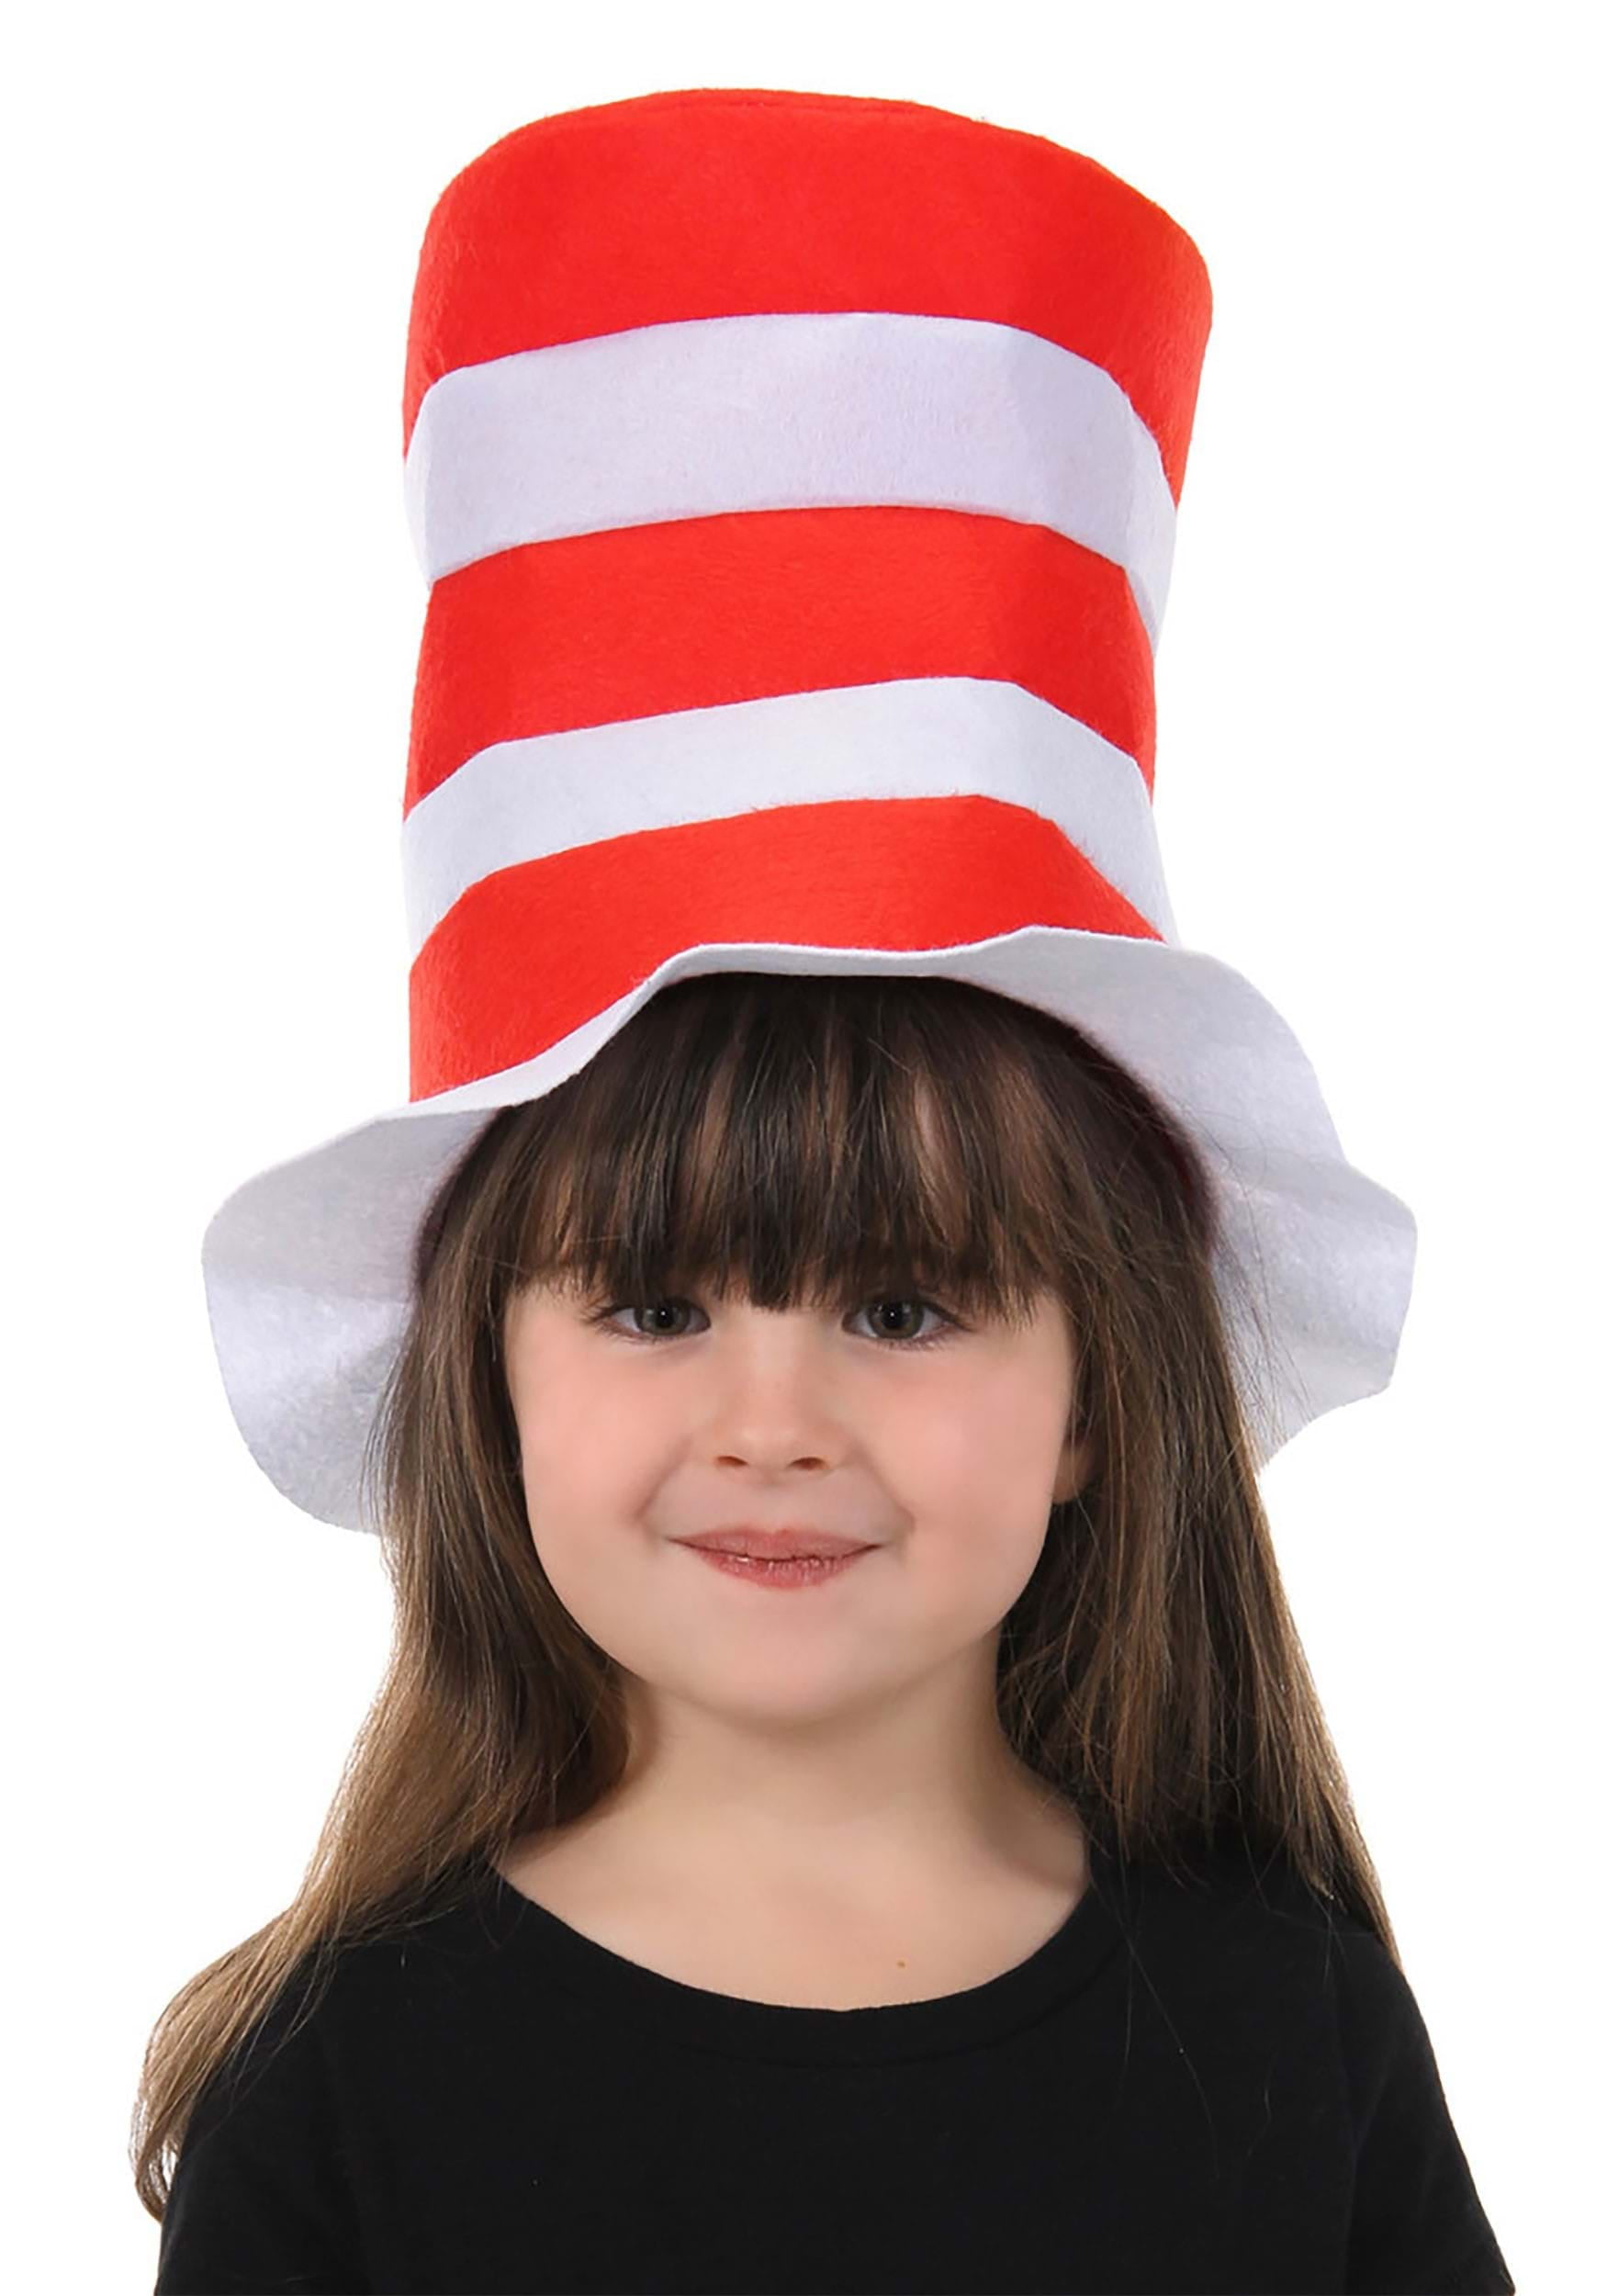 Seuss Cat in The Hat Costume Socks for Kids by Elope Dr 